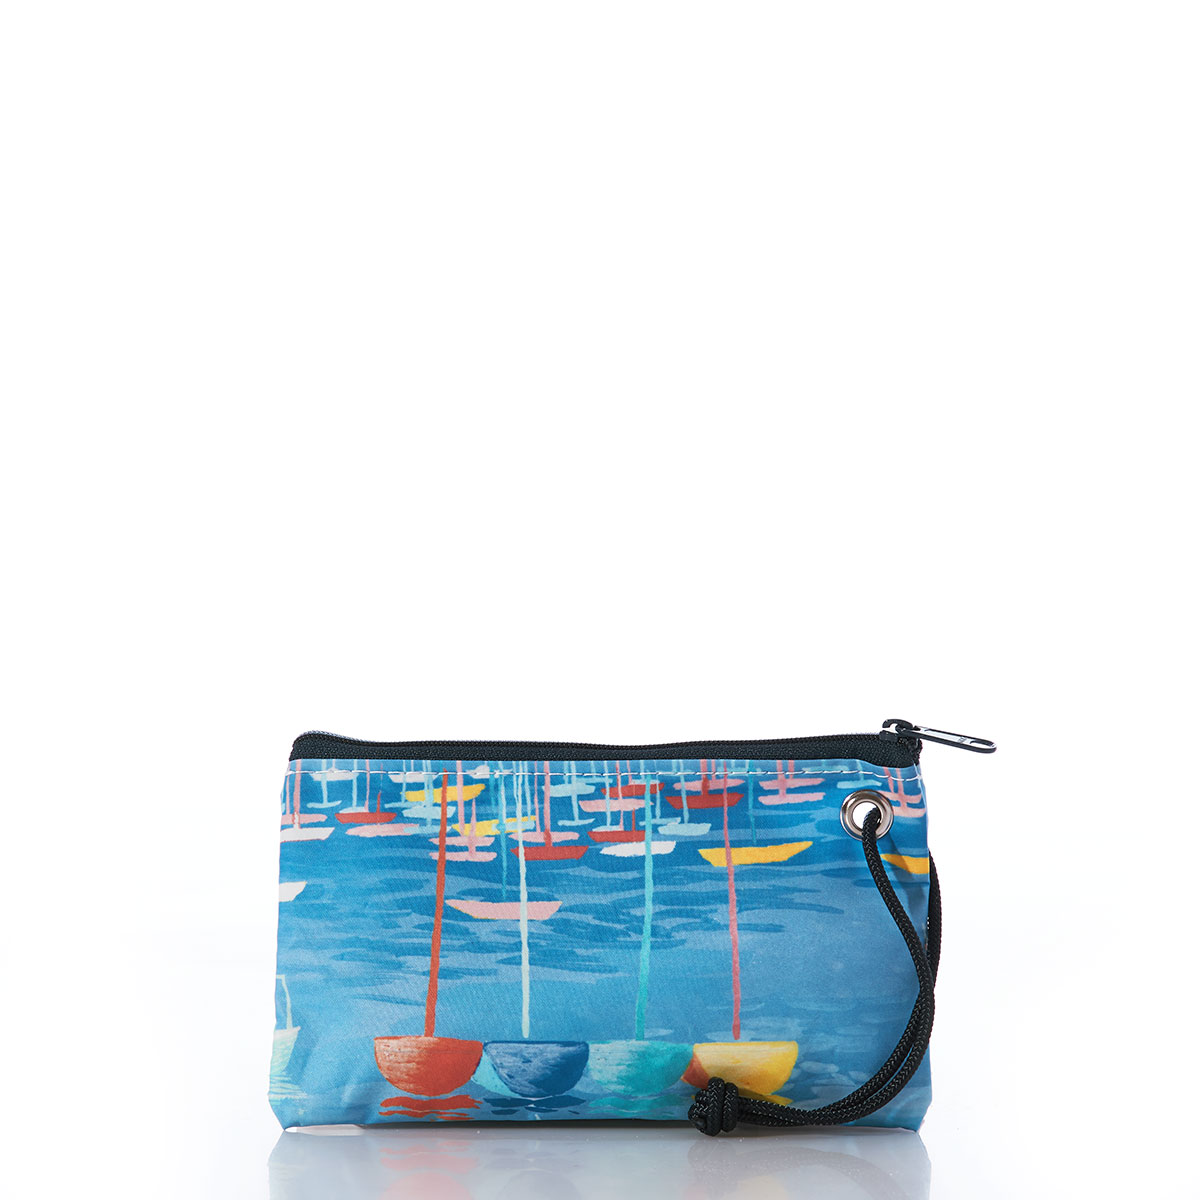 colorful sailboats bob in a blue ocean on a recycled sail cloth wristlet with a navy zipper